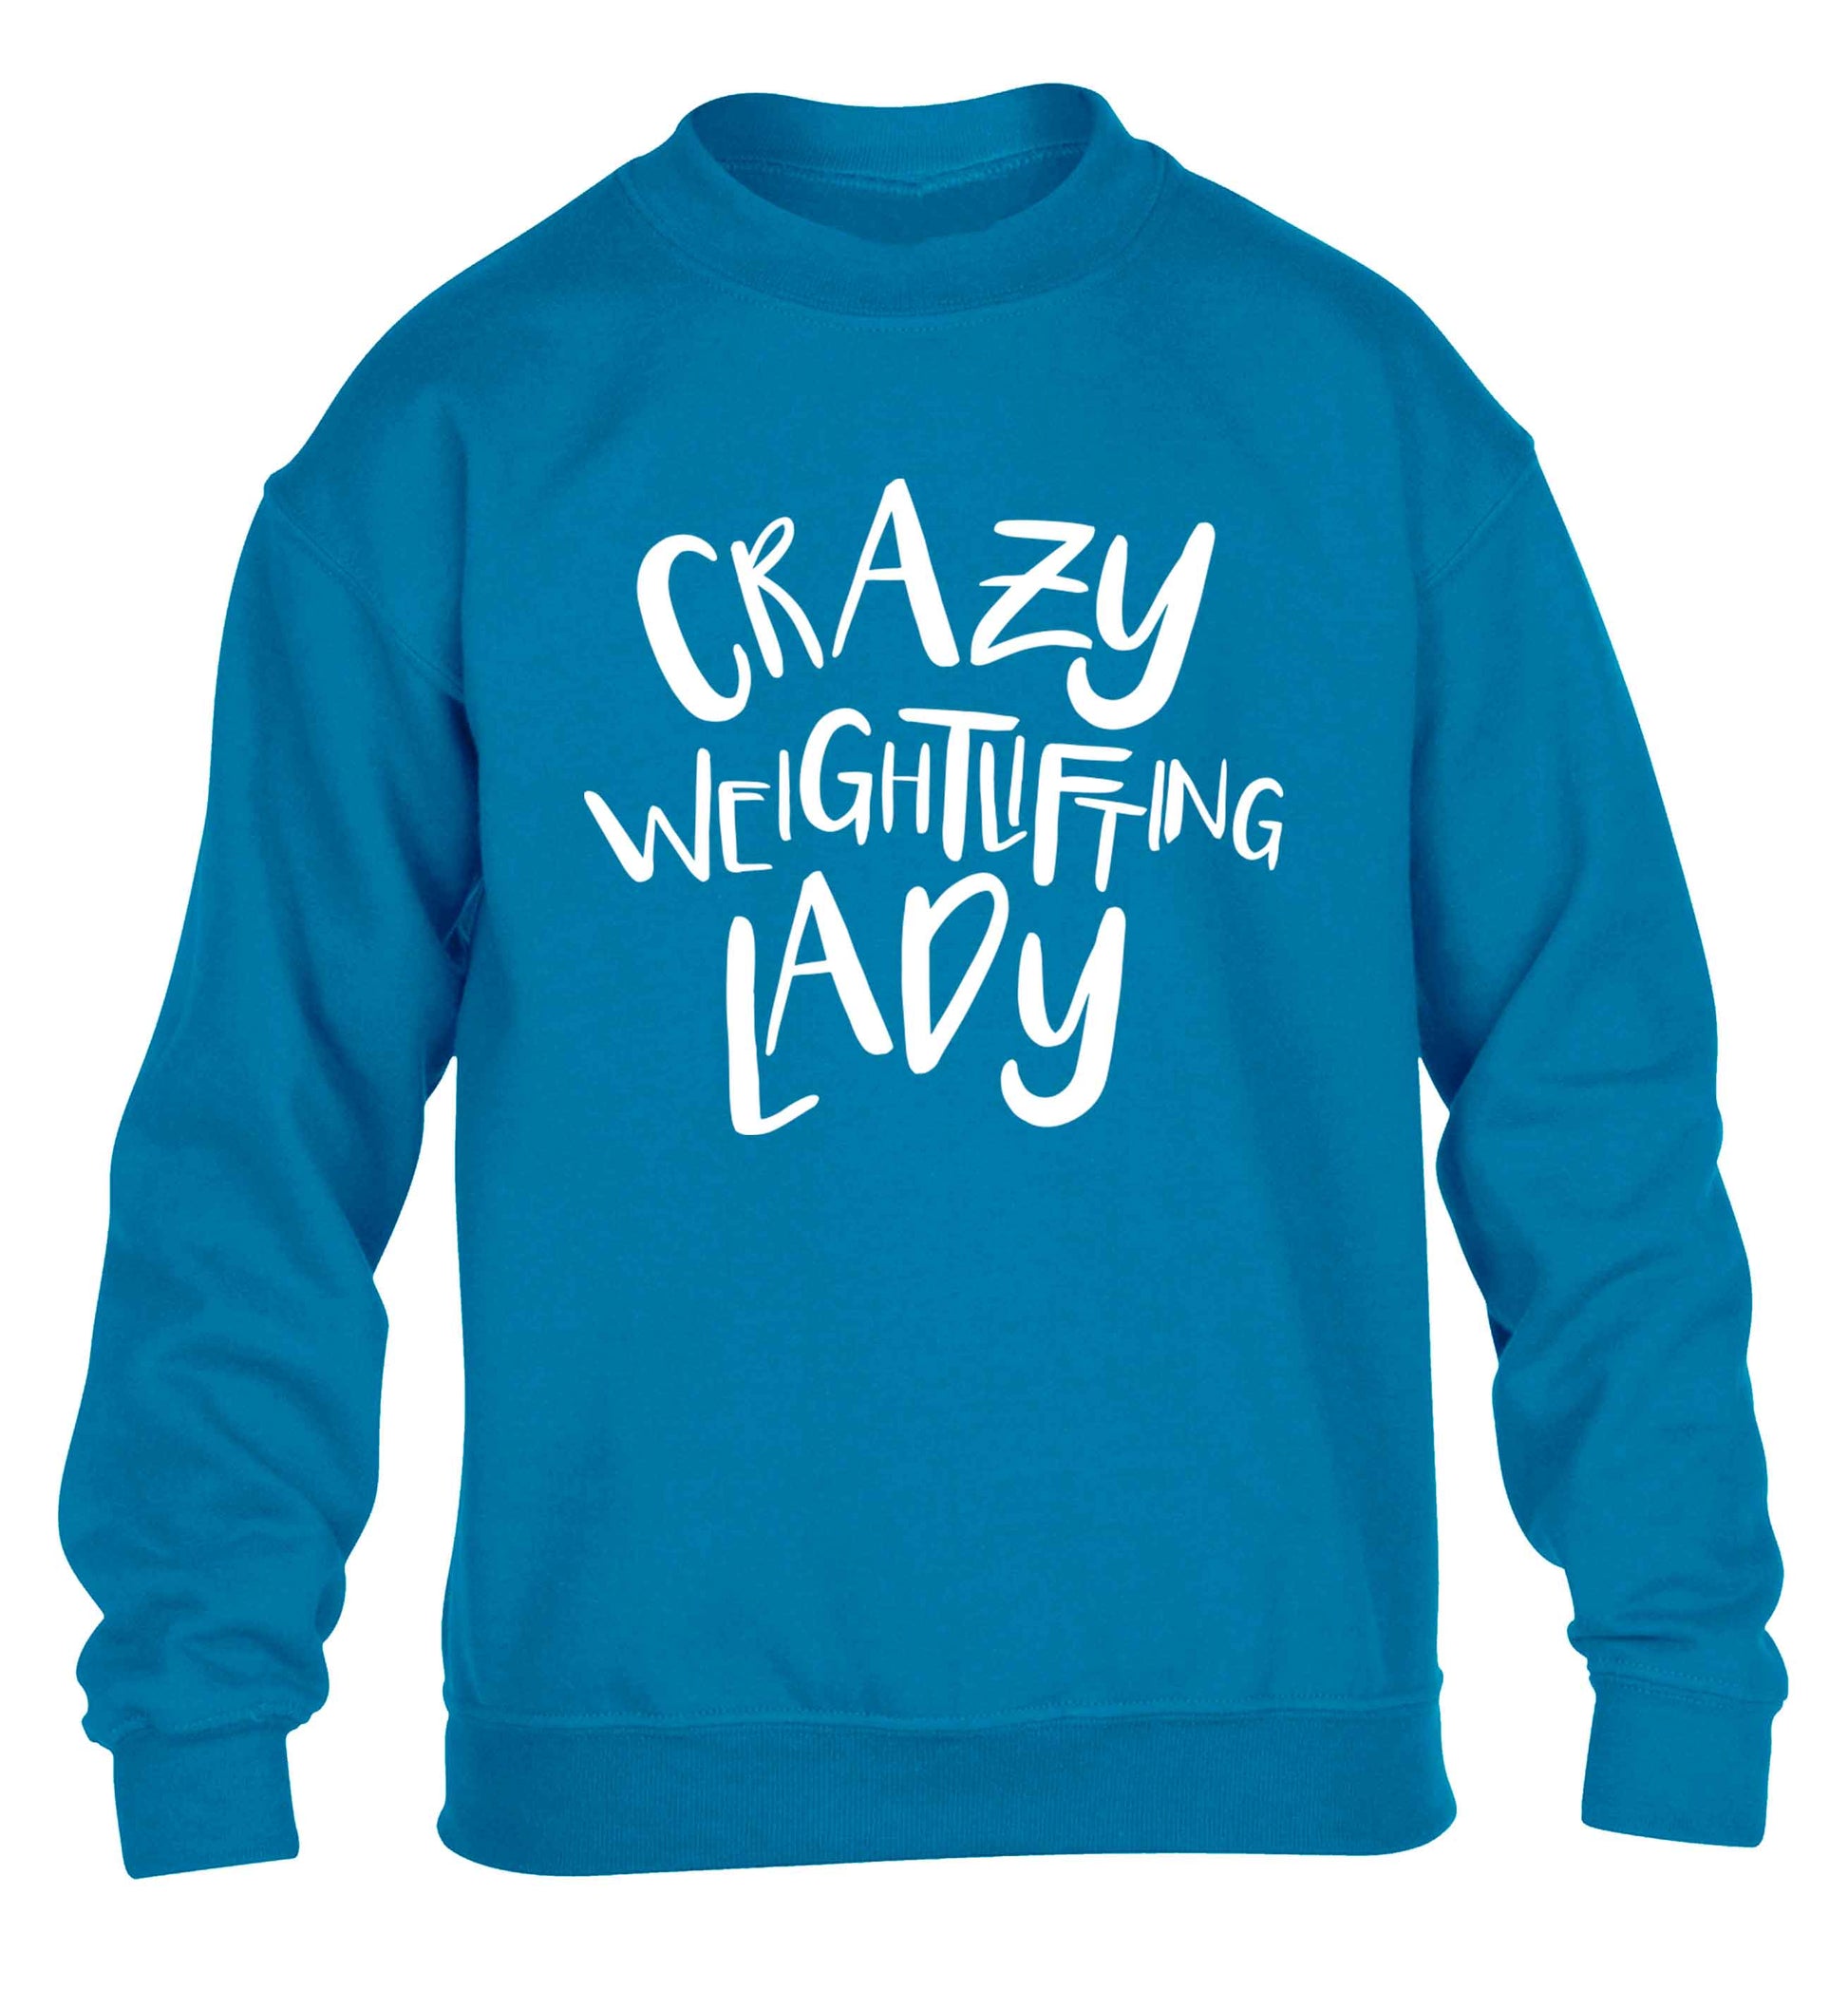 Crazy weightlifting lady children's blue sweater 12-13 Years